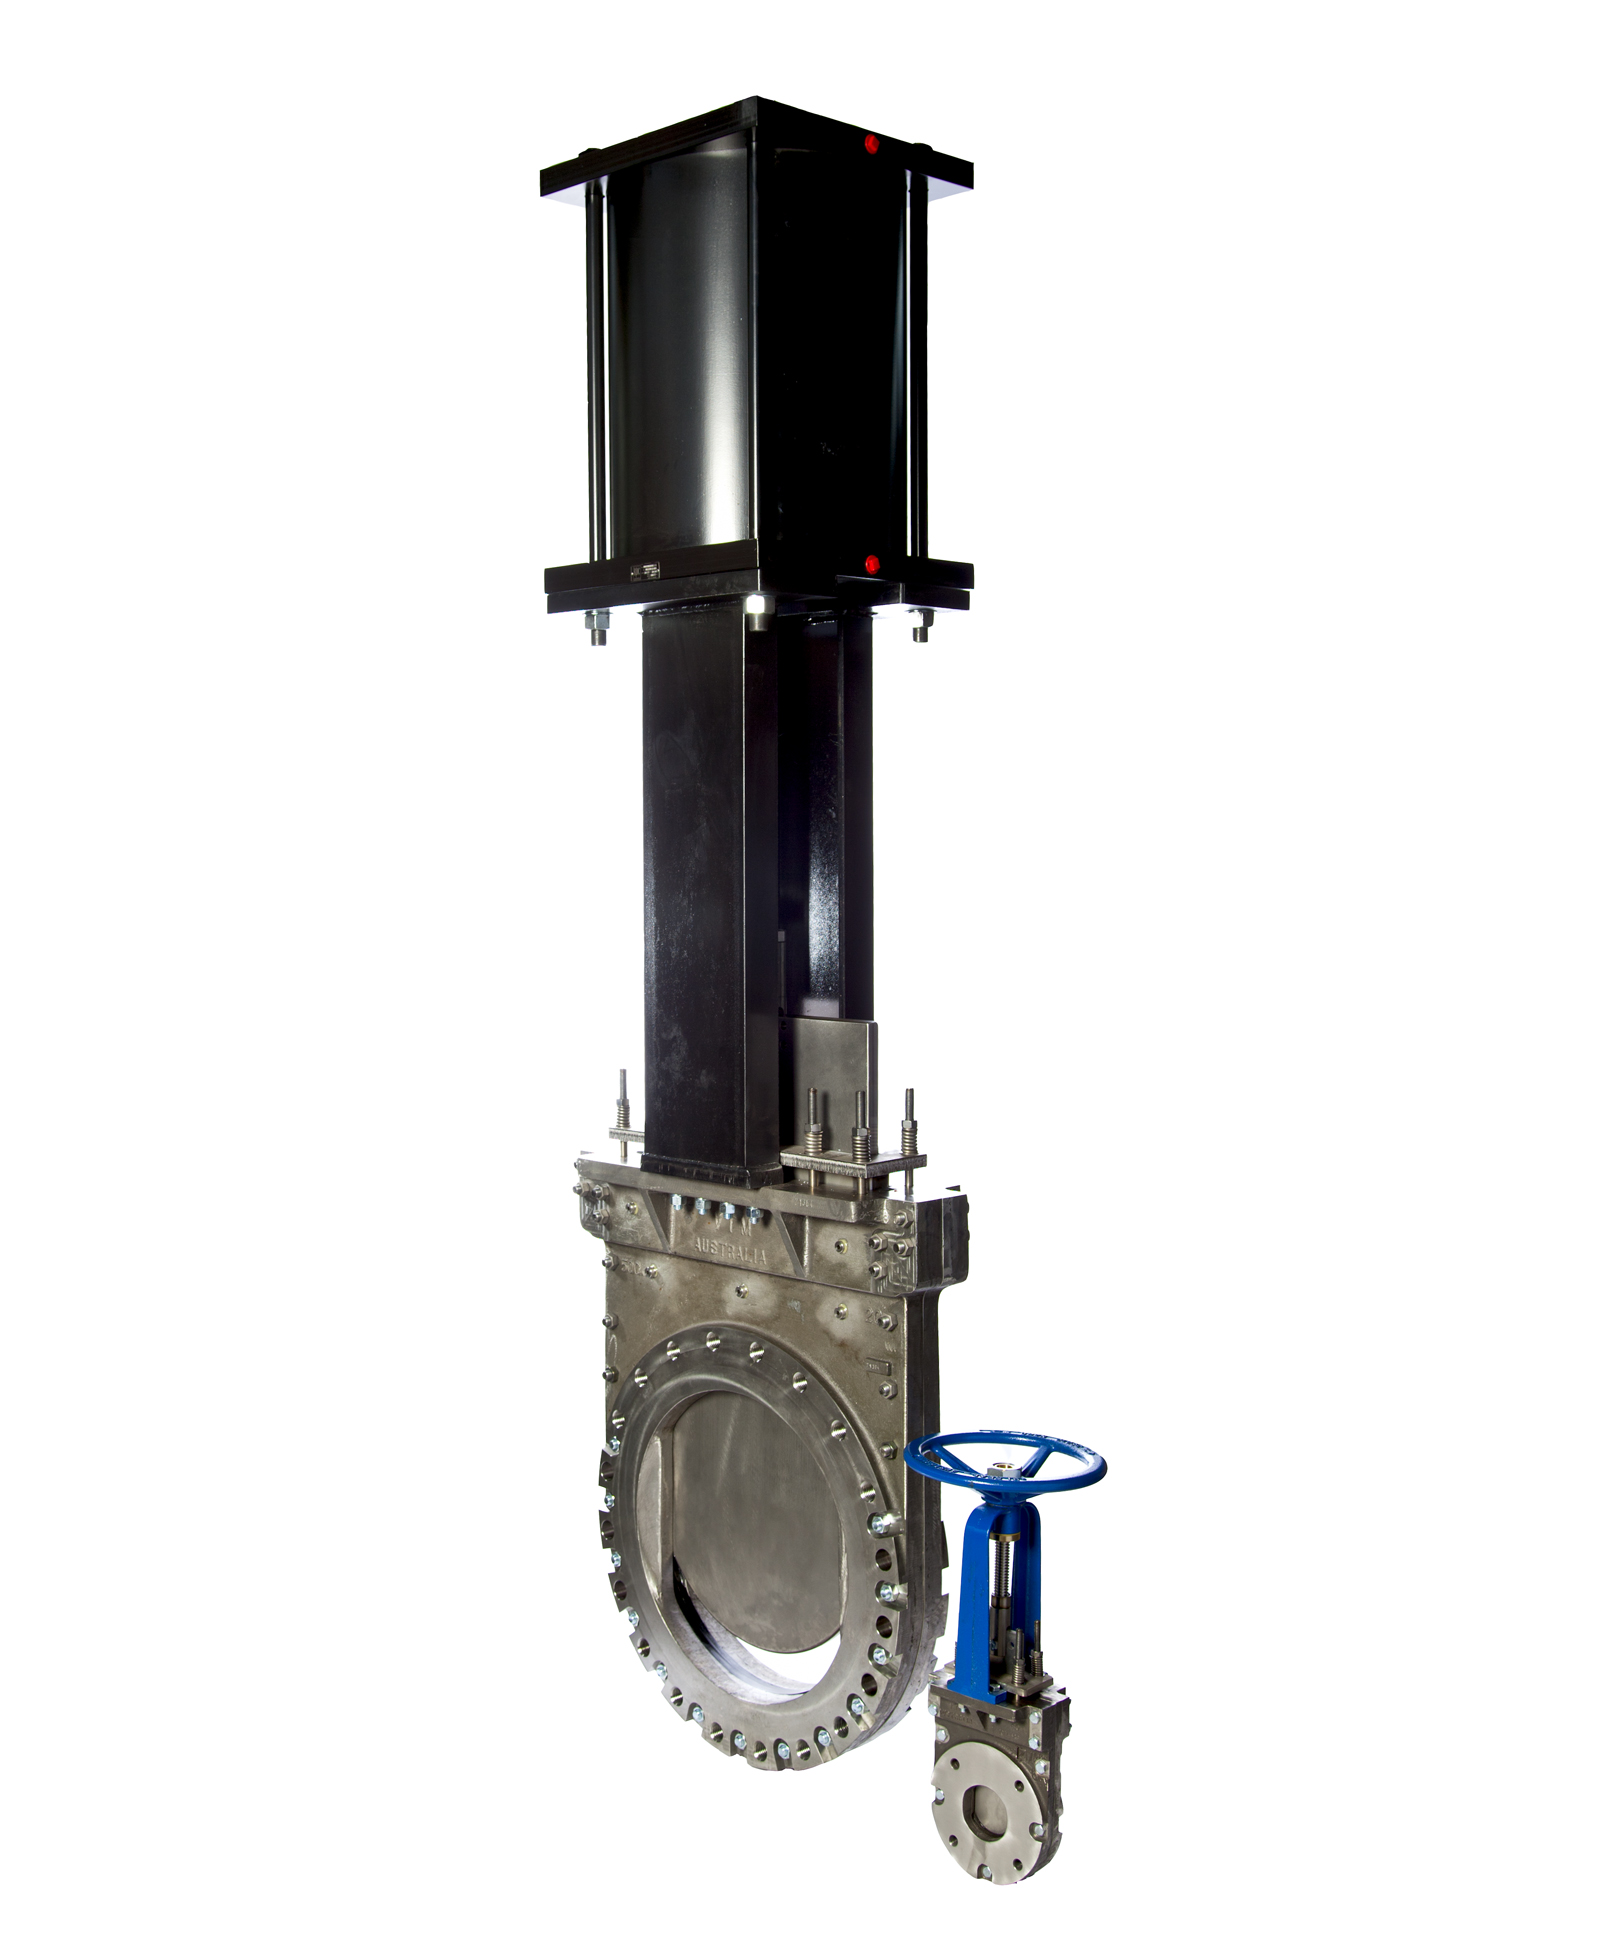 Australian designed, cast, machined and assembled double acting knife gate valve